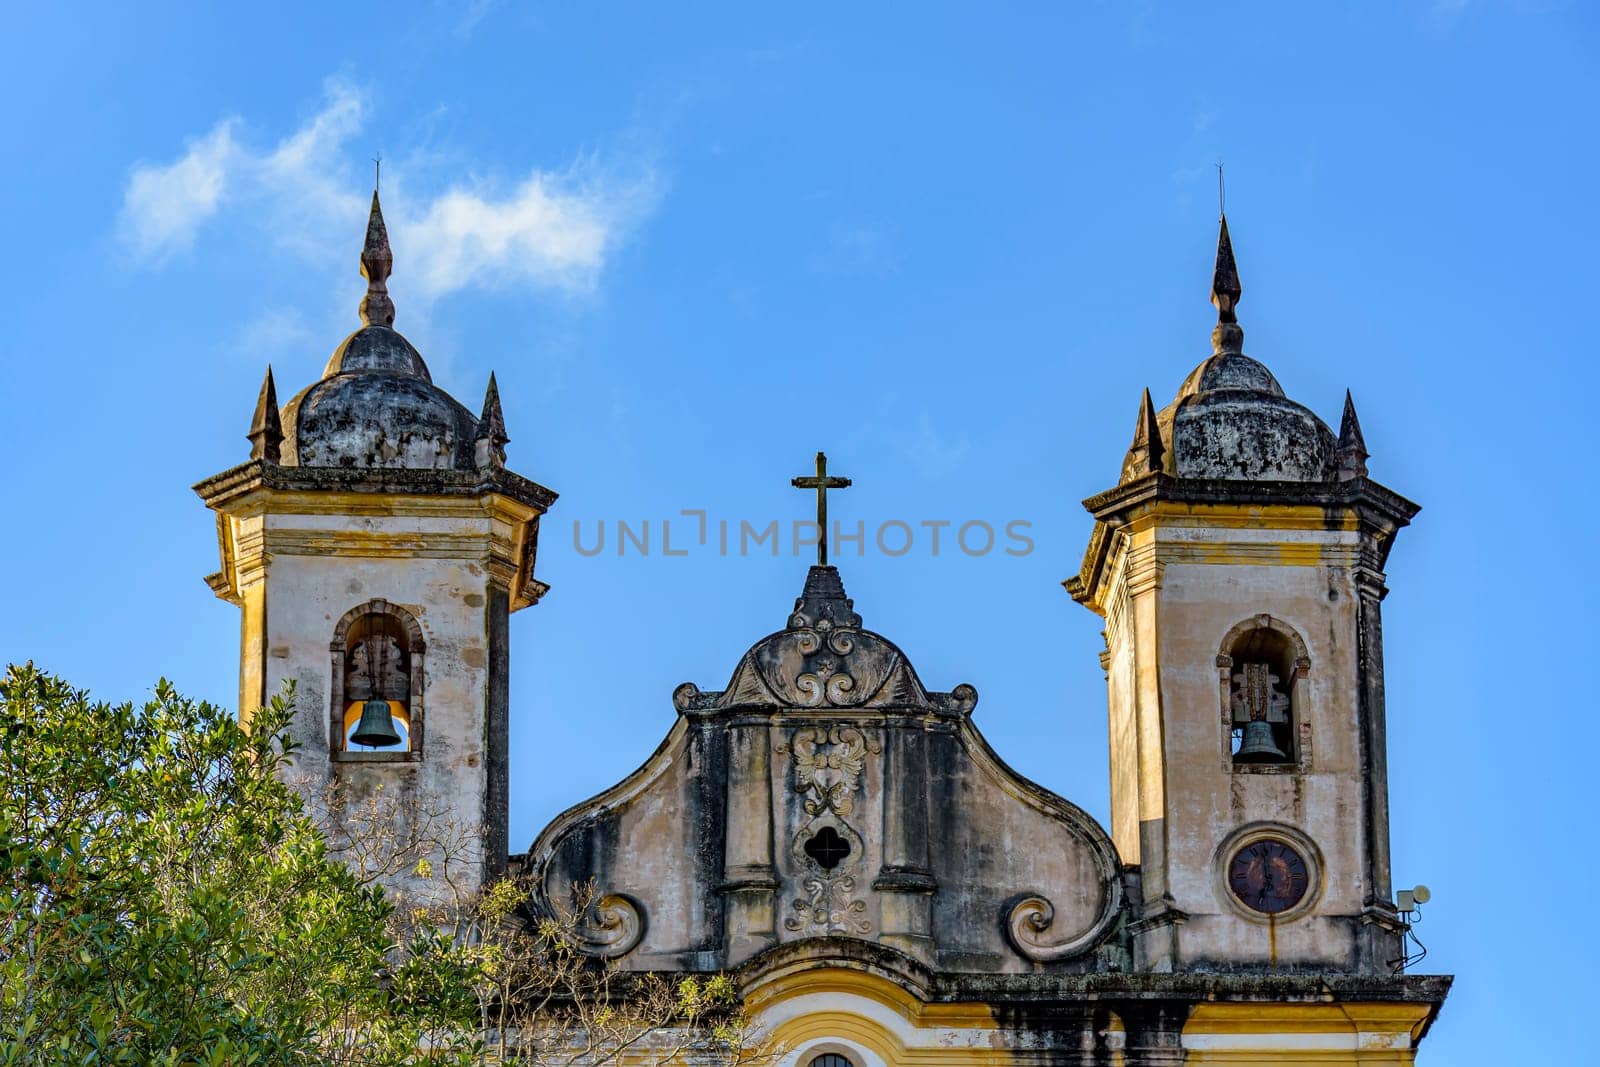 Baroque style historic church towers with their bells in Ouro Preto, Minas Gerais